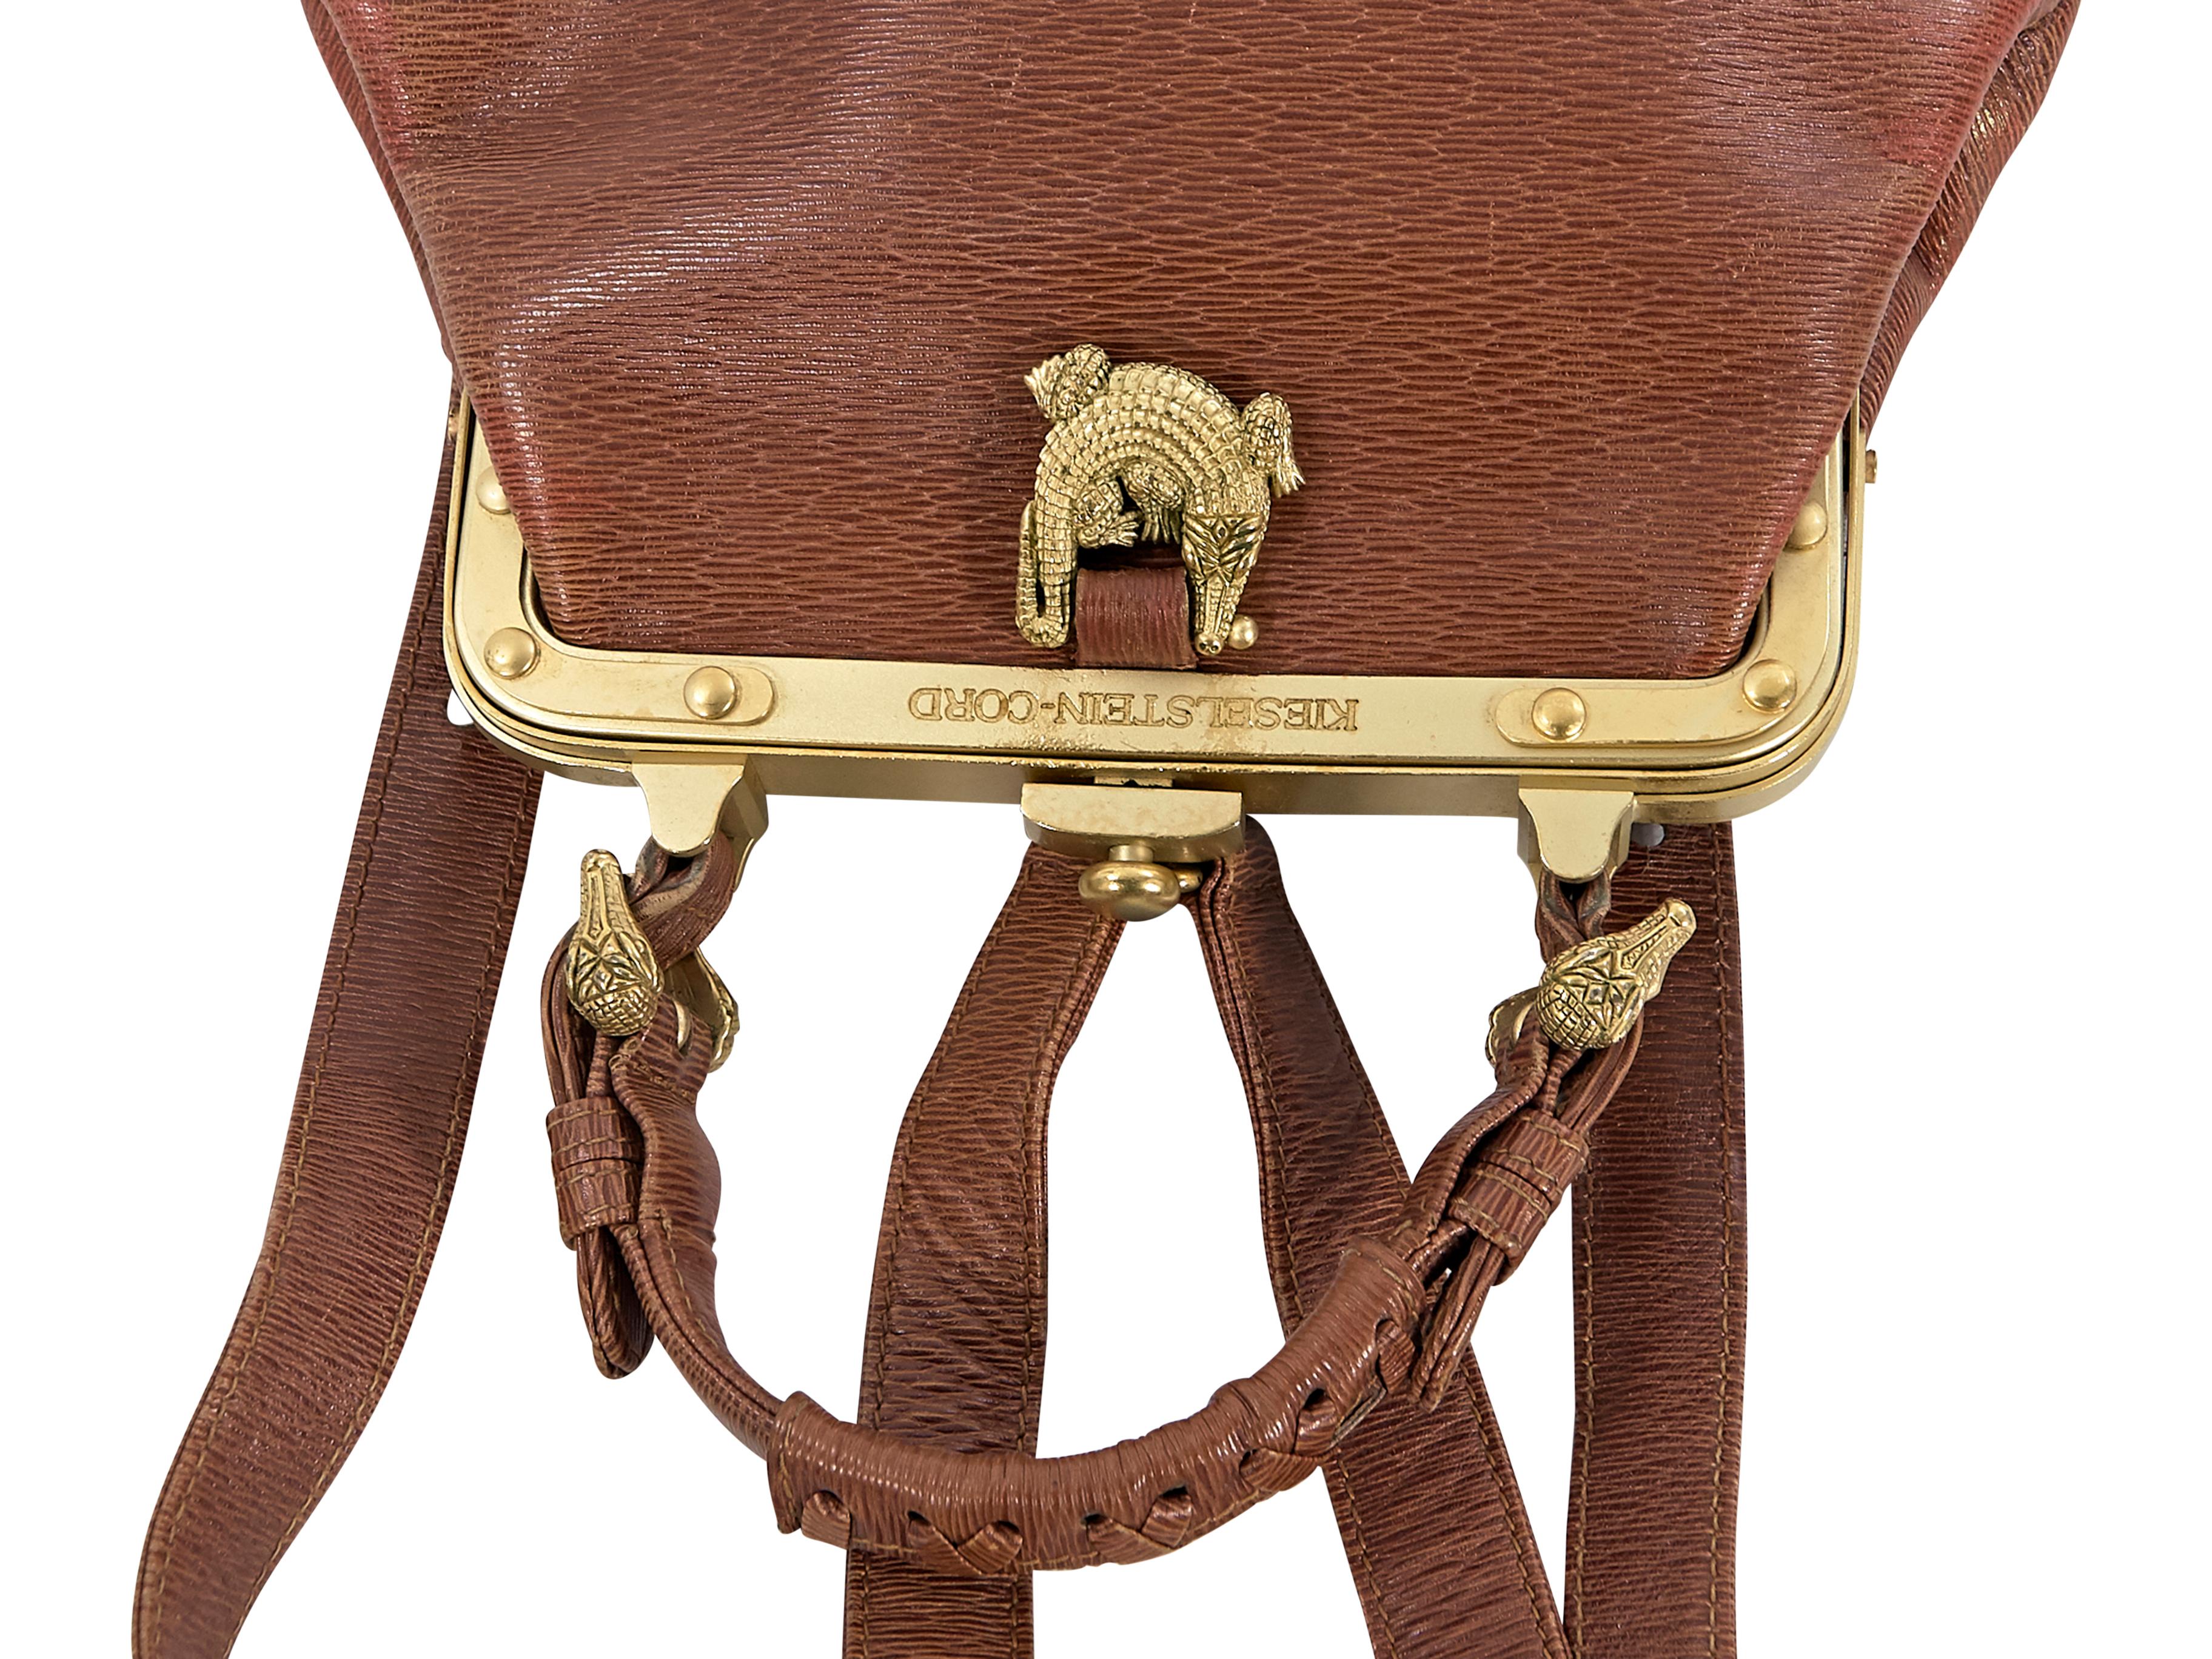 Women's Keiselstein-Cord Brown Convertible Leather Bag